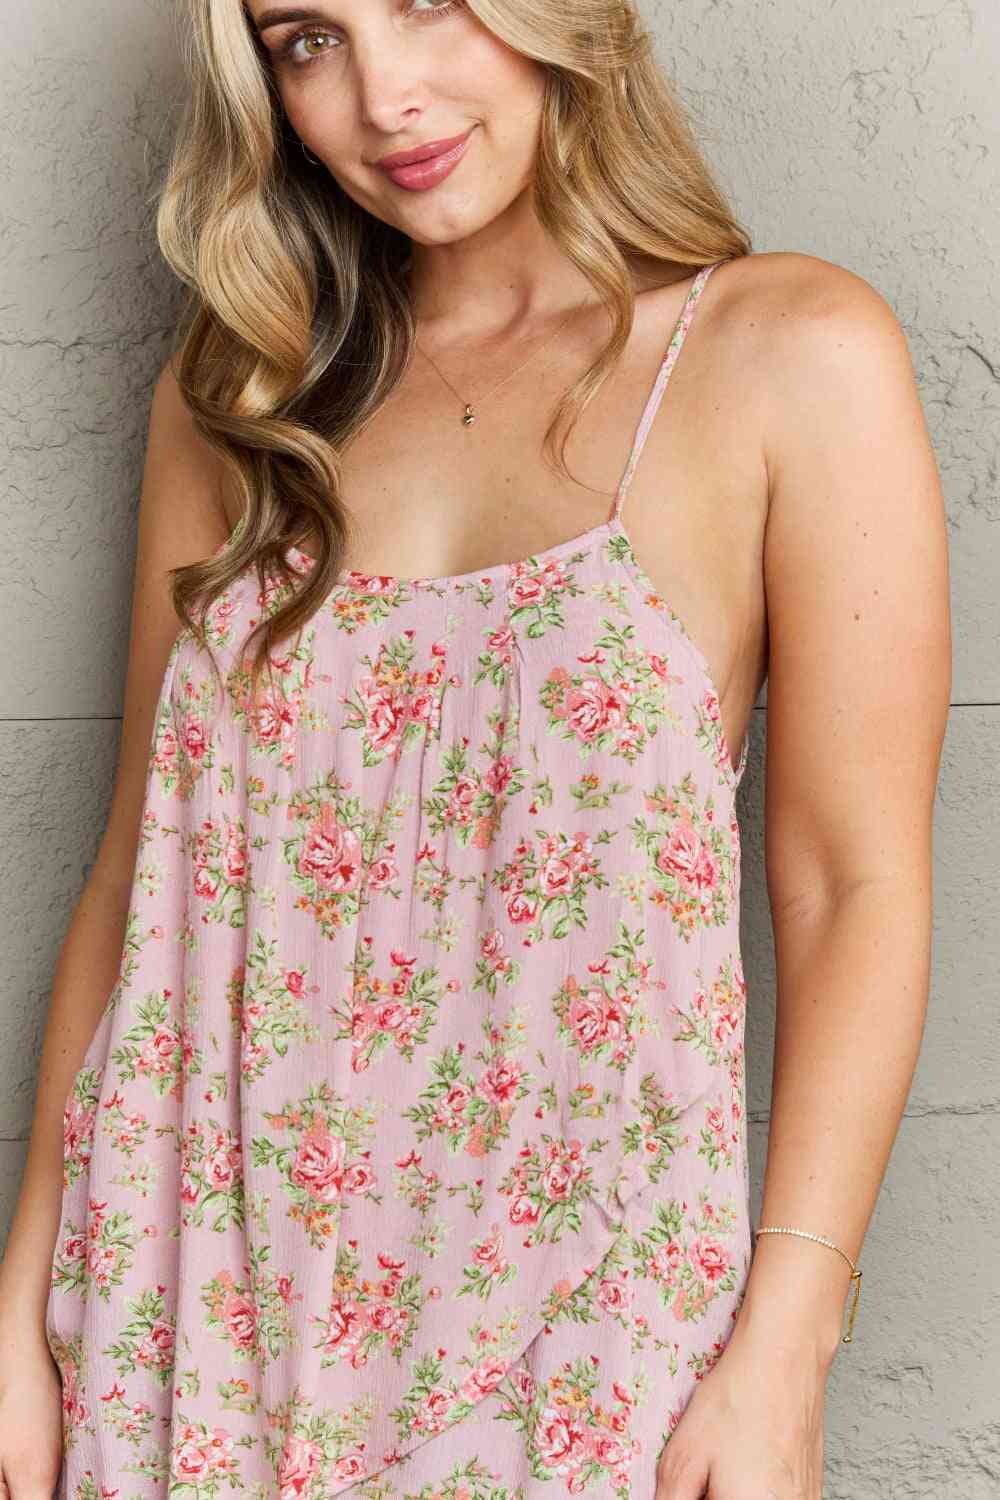 Ninexis Hang Loose Tulip Hem Cami Top in Mauve Floral - Dixie Hike & Style